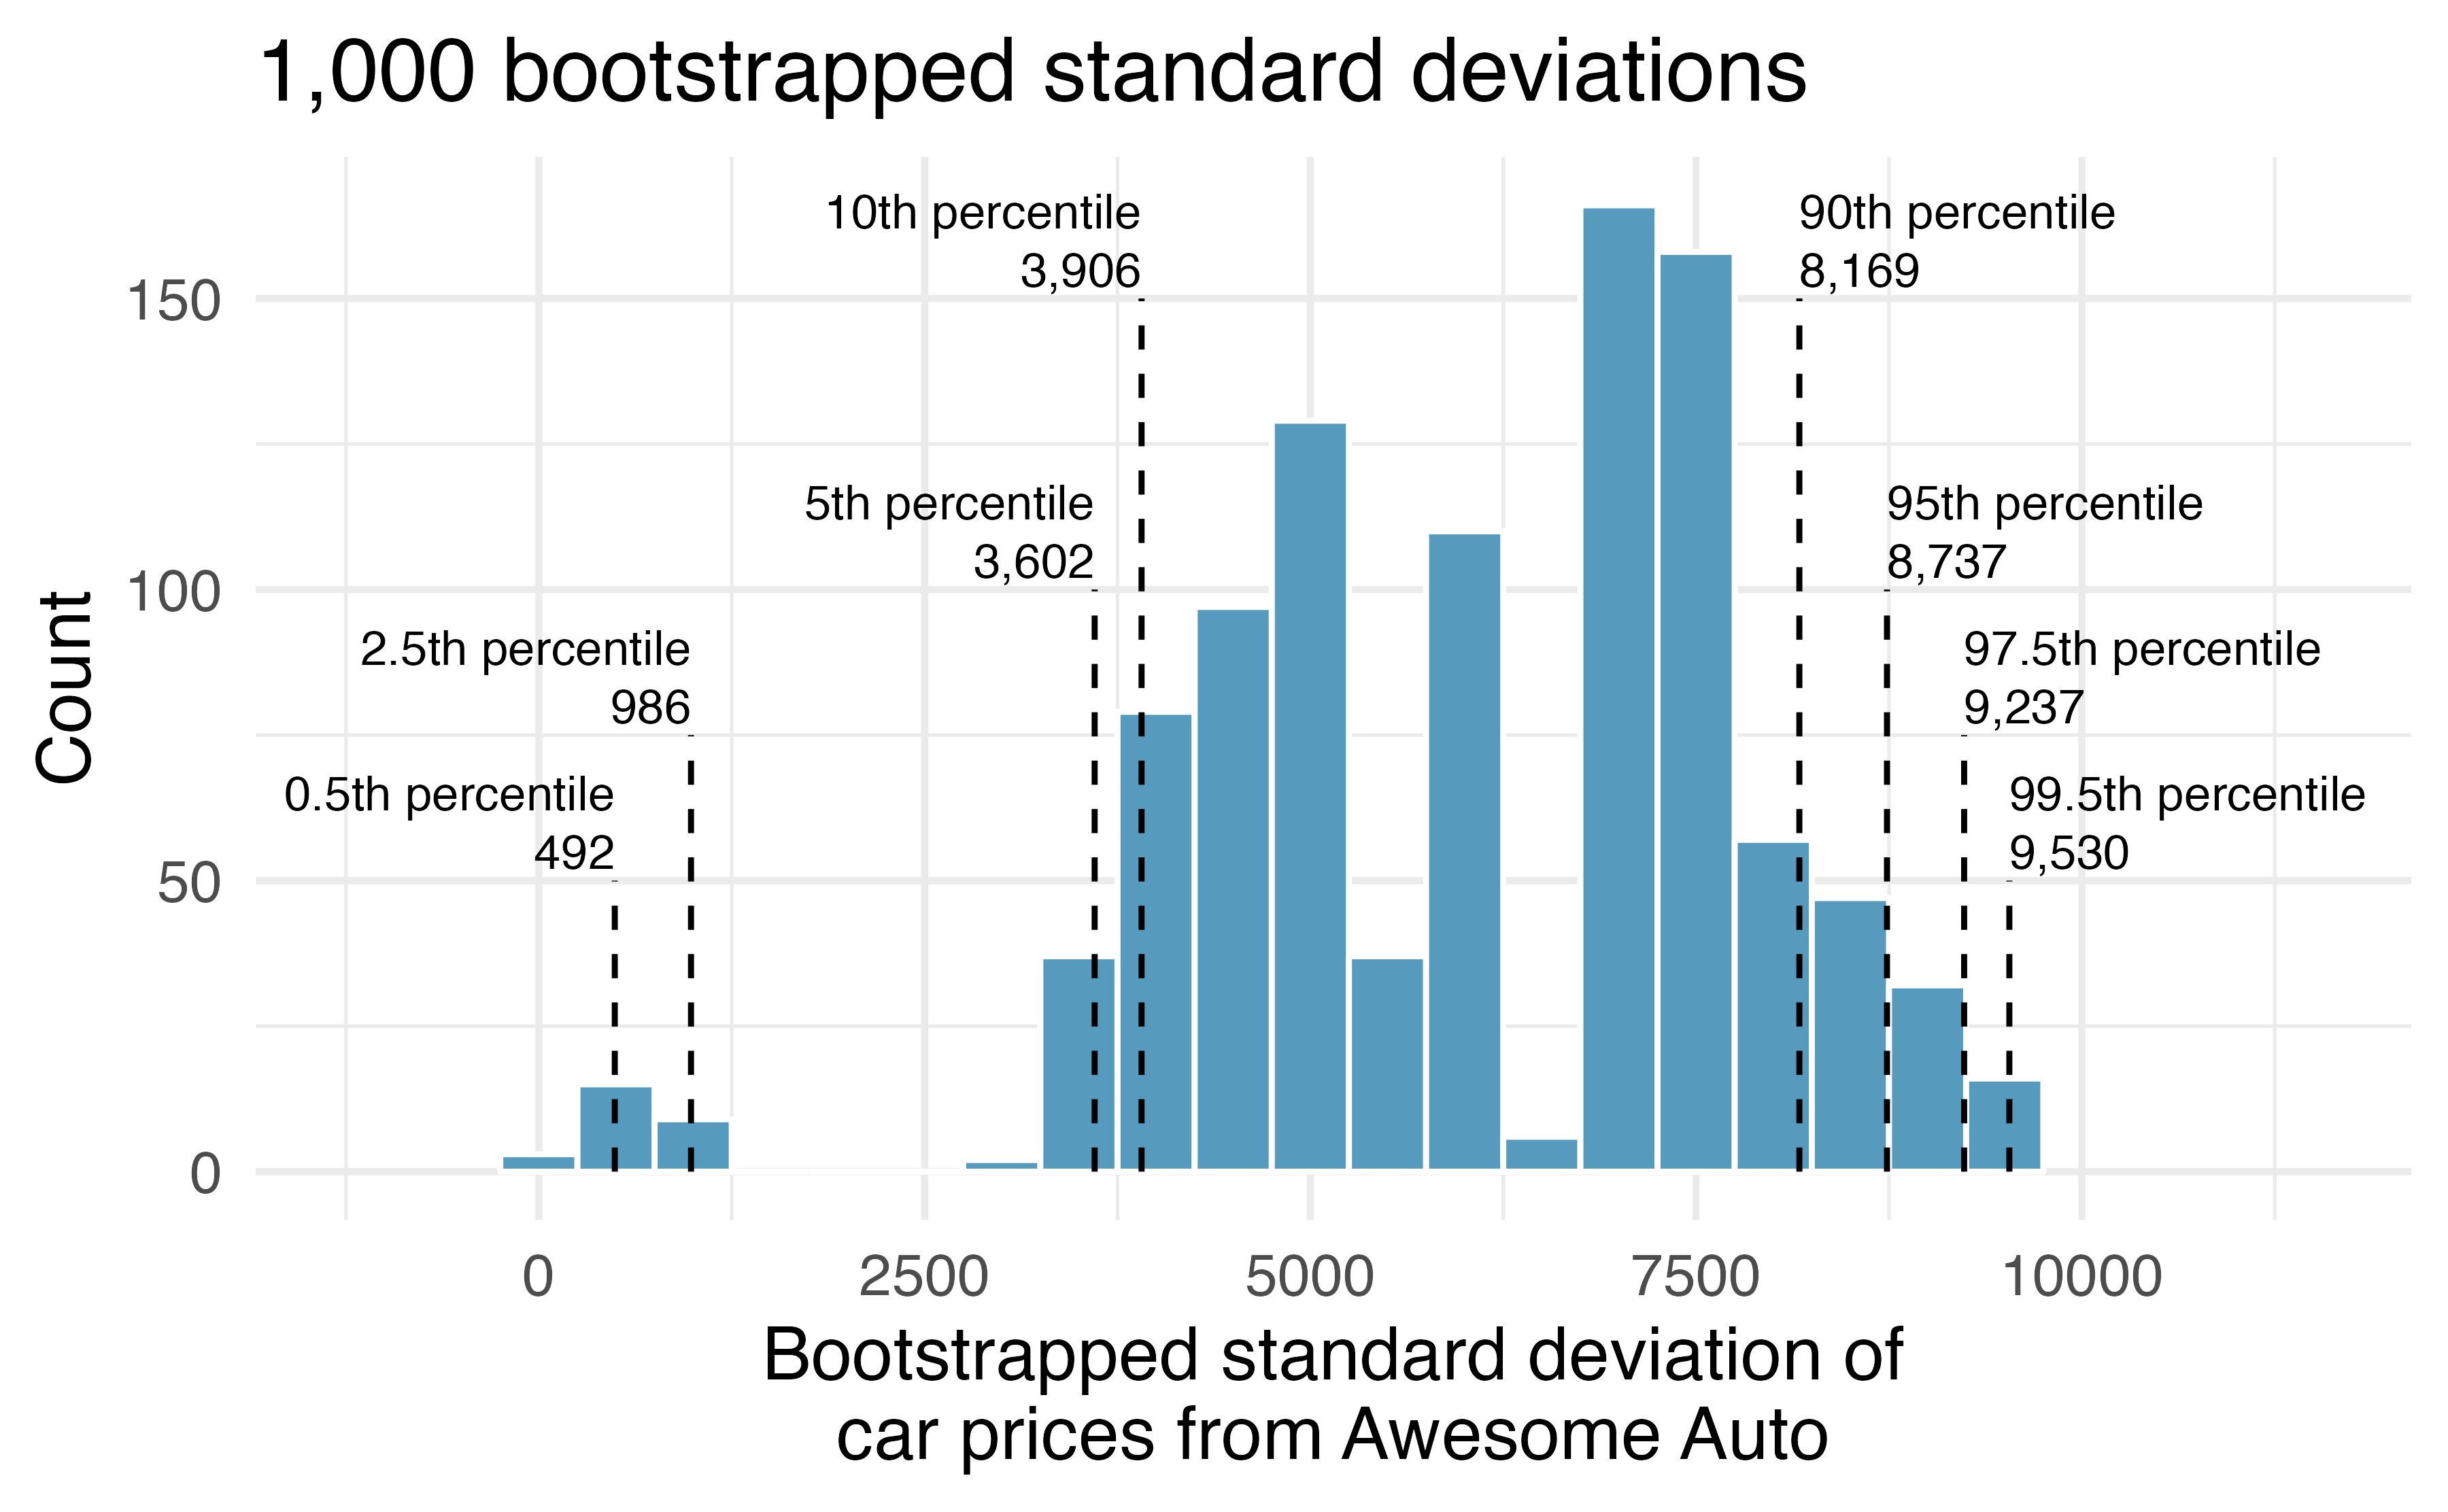 A histogram of the standard deviations of 1000 bootstrapped samples from the Awesome Auto data.  The percentiles of the bootstrapped standard deviations are given to create 80%, 90%, 95%, or 99% bootstrap confidence intervals for the true standard deviation of the population.